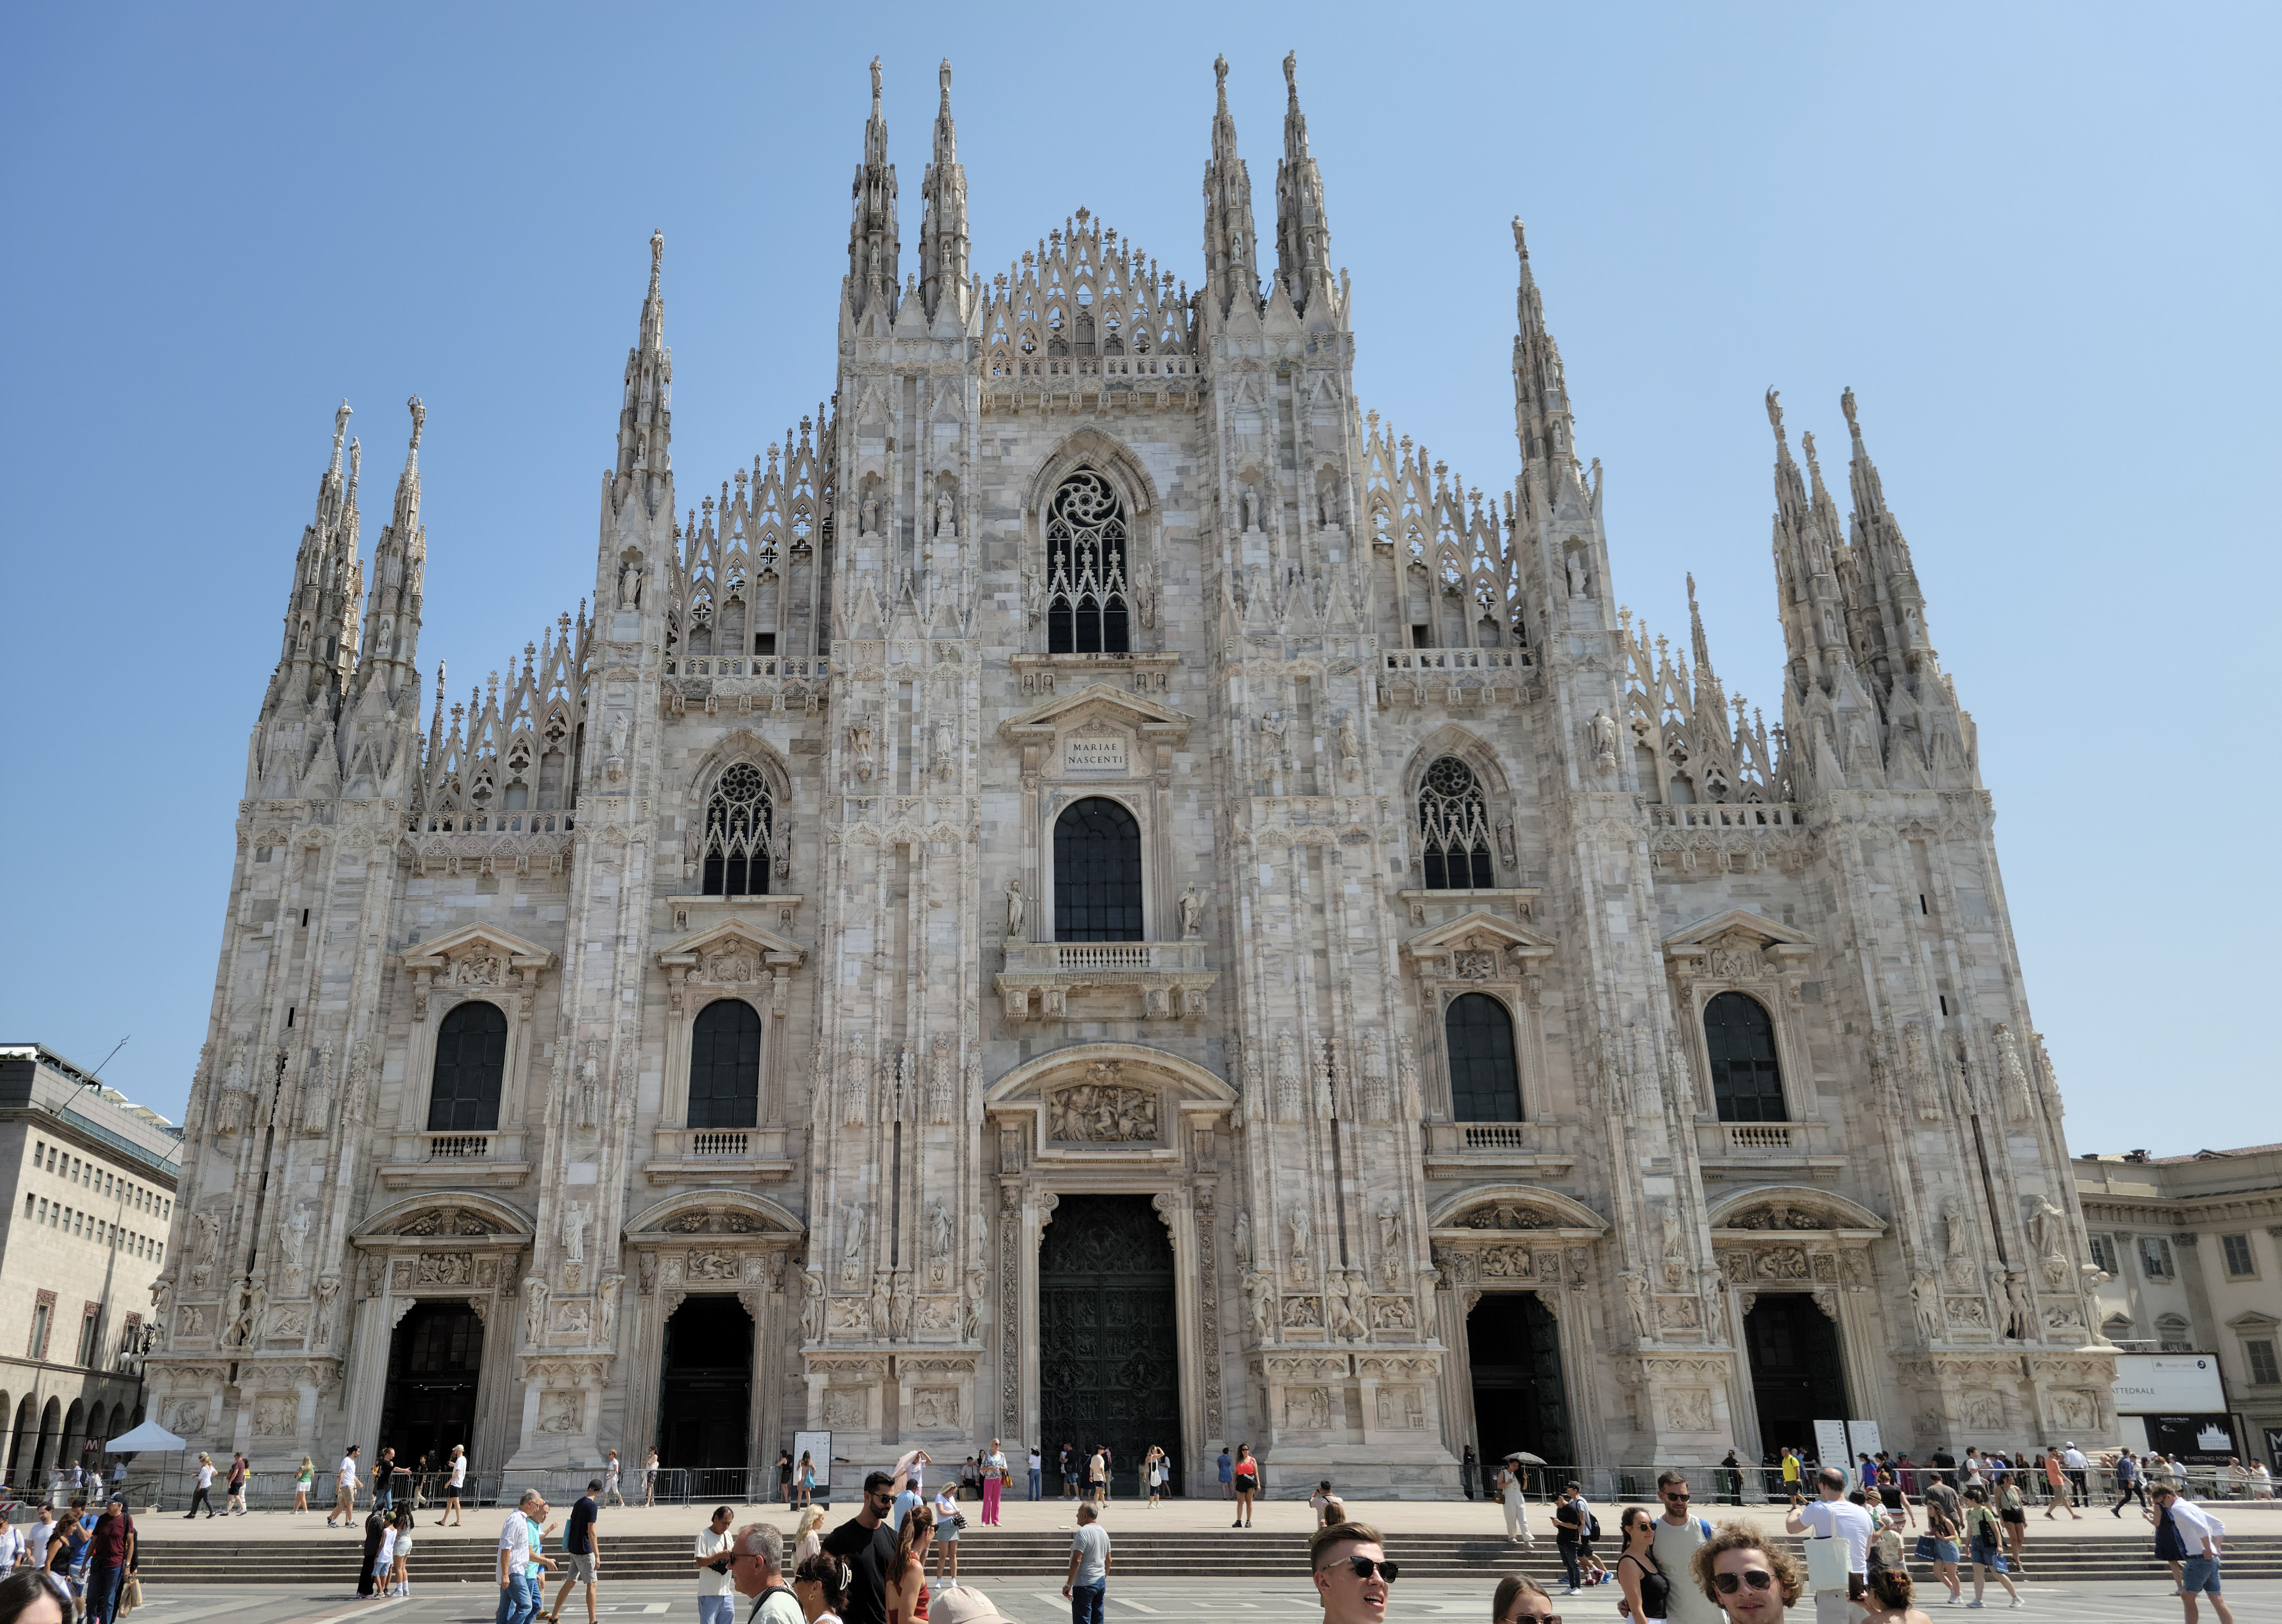 The Duomo di Milano is the largest church in Italy and third largest in the world, and is a must-see in the Italian city even if you’re only there for 24 hours. Photo: Tom Eves